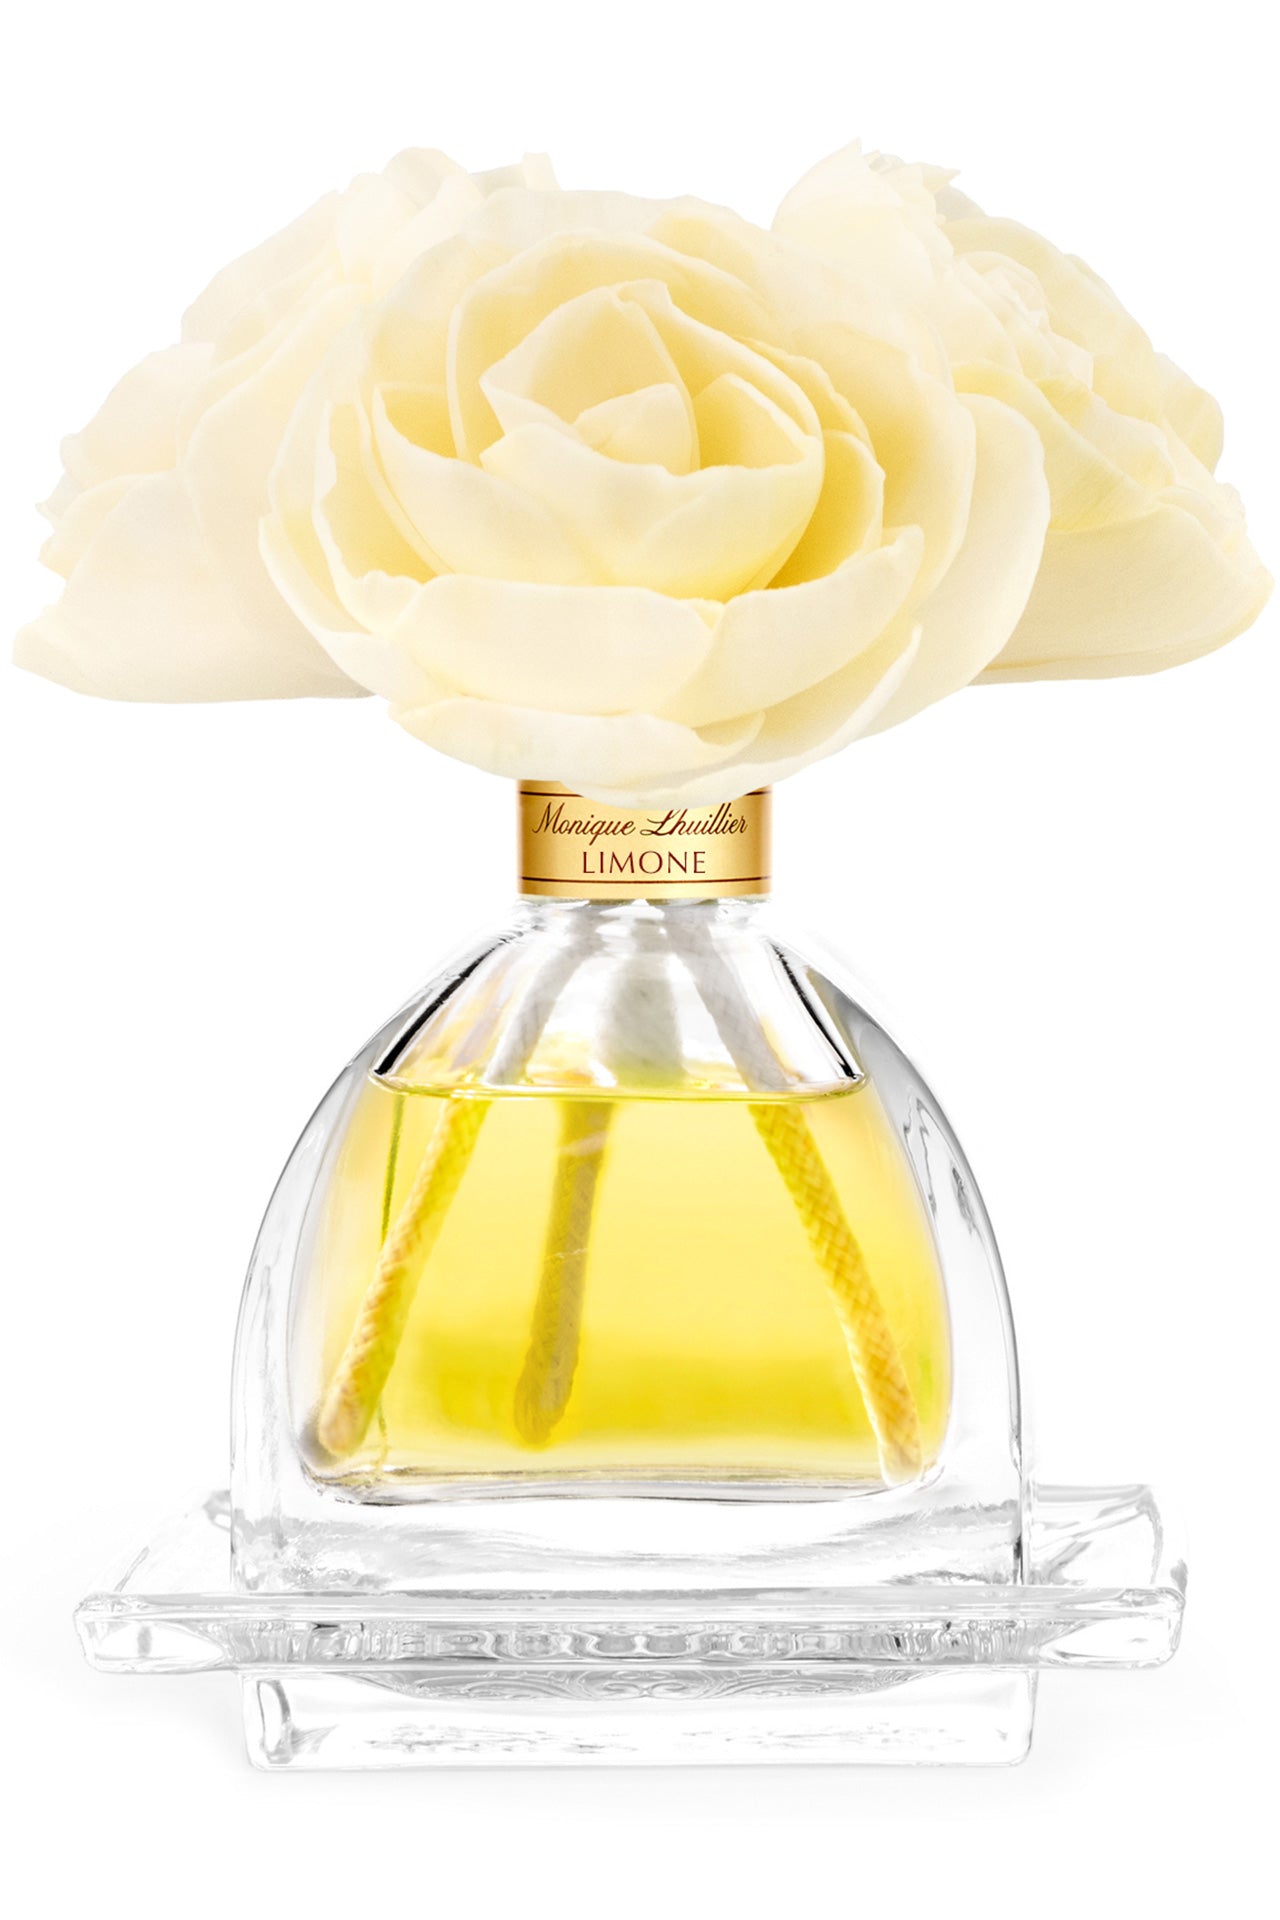 Monique Lhuillier Limone Diffuser with peony sola flowers.